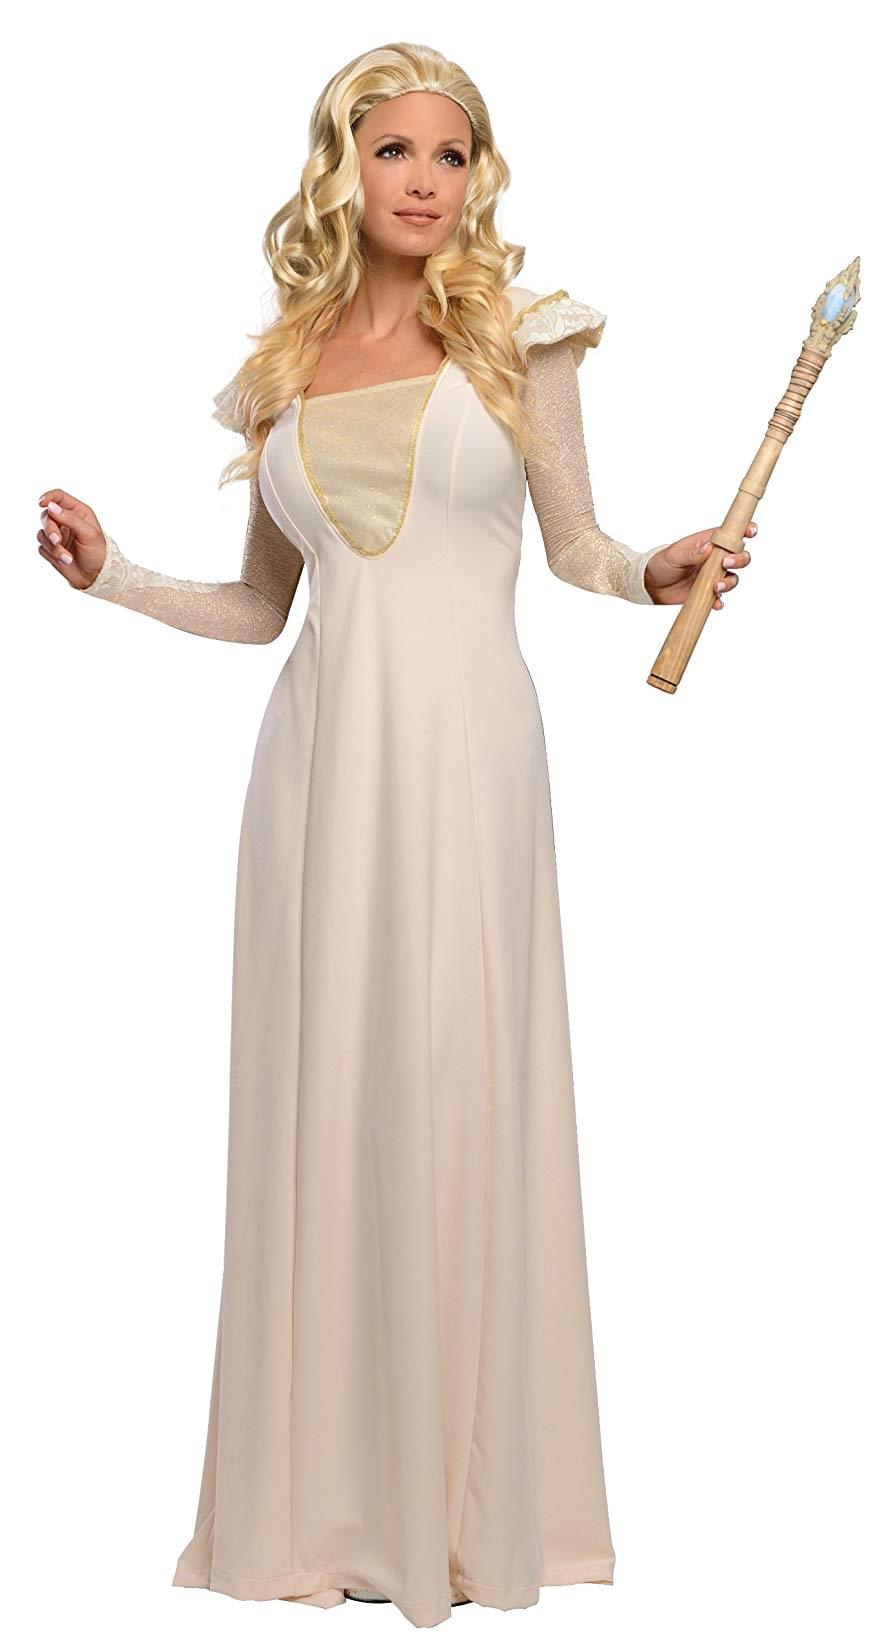 Oz The Great And Powerful Glinda Blonde Costume Wig Adult